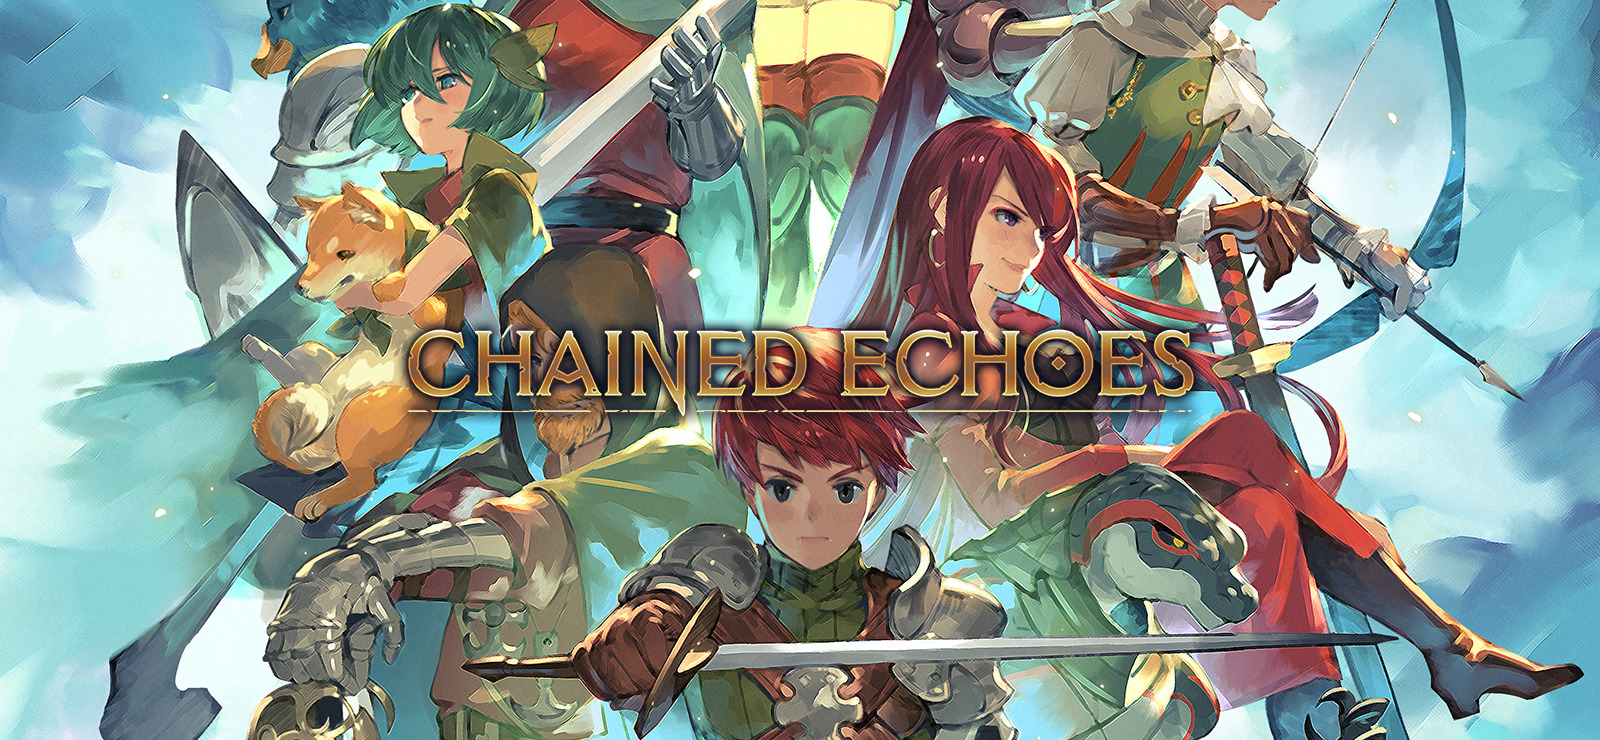 Chained Echoes Original Soundtrack Available For Purchase; 50 Songs - Noisy  Pixel